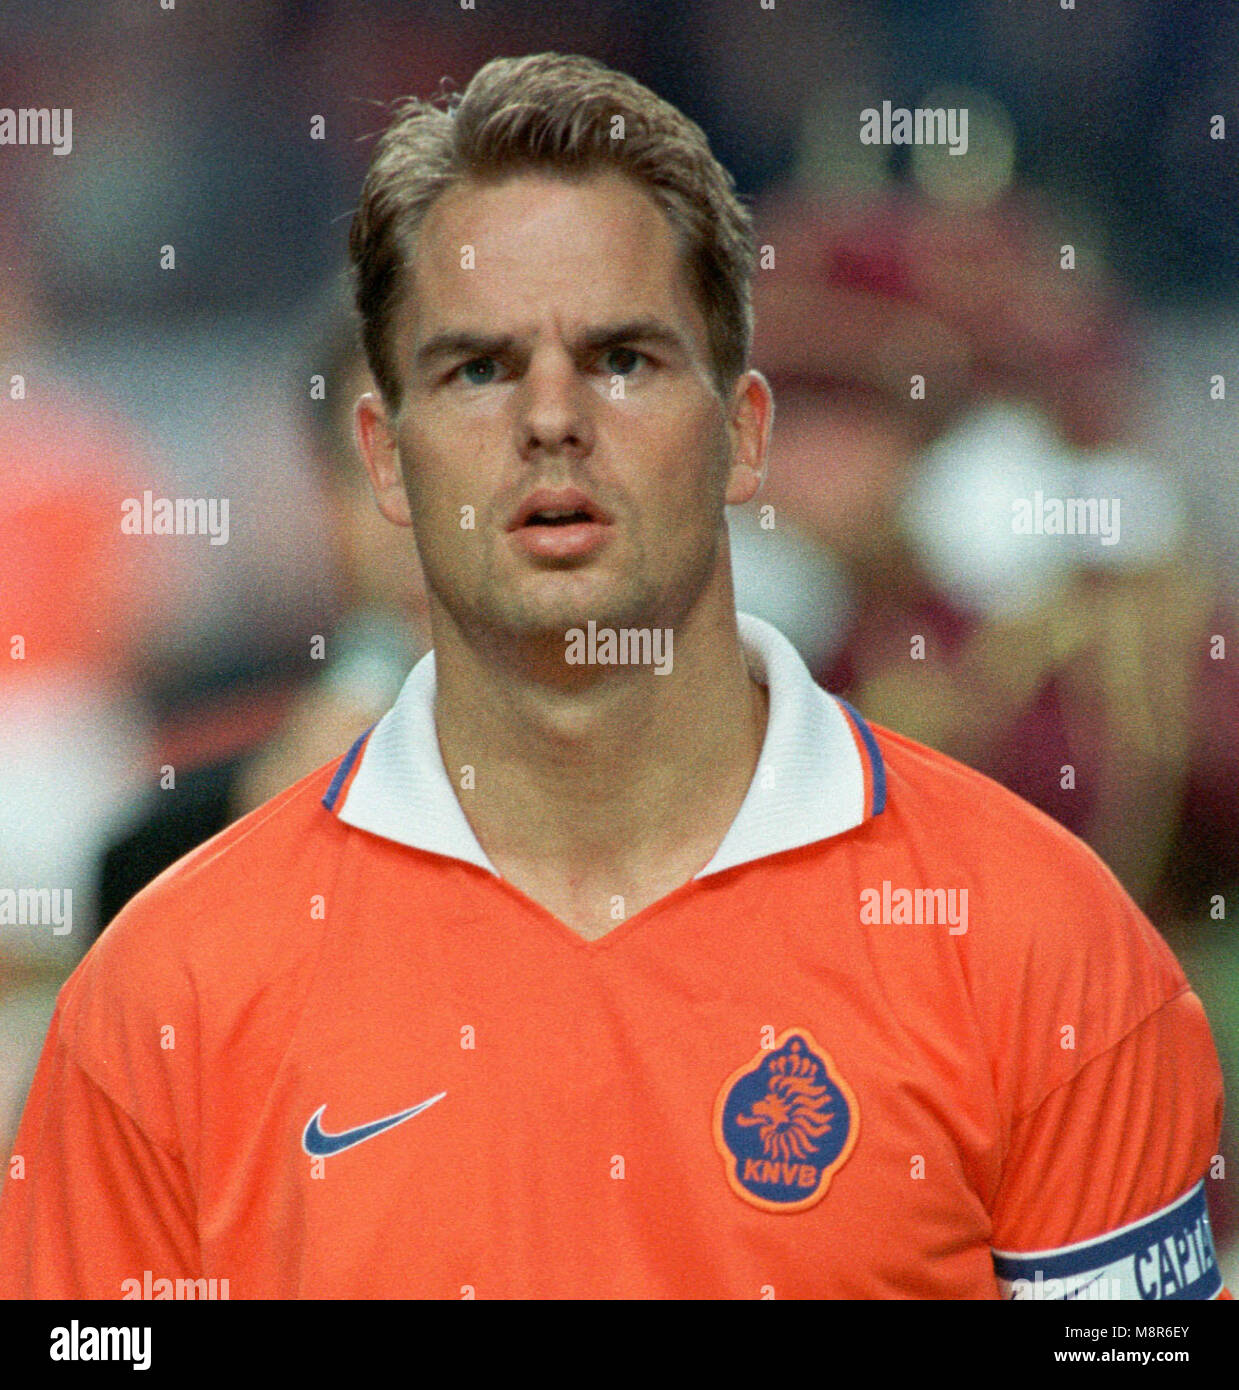 Amsterdam Arena, The Netherlands,11.10.1997 Qualifier for the FIFA World Cup France 1998, Netherlands vs. Turkey 0:0 --- Frank DE BOER (NED) Stock Photo